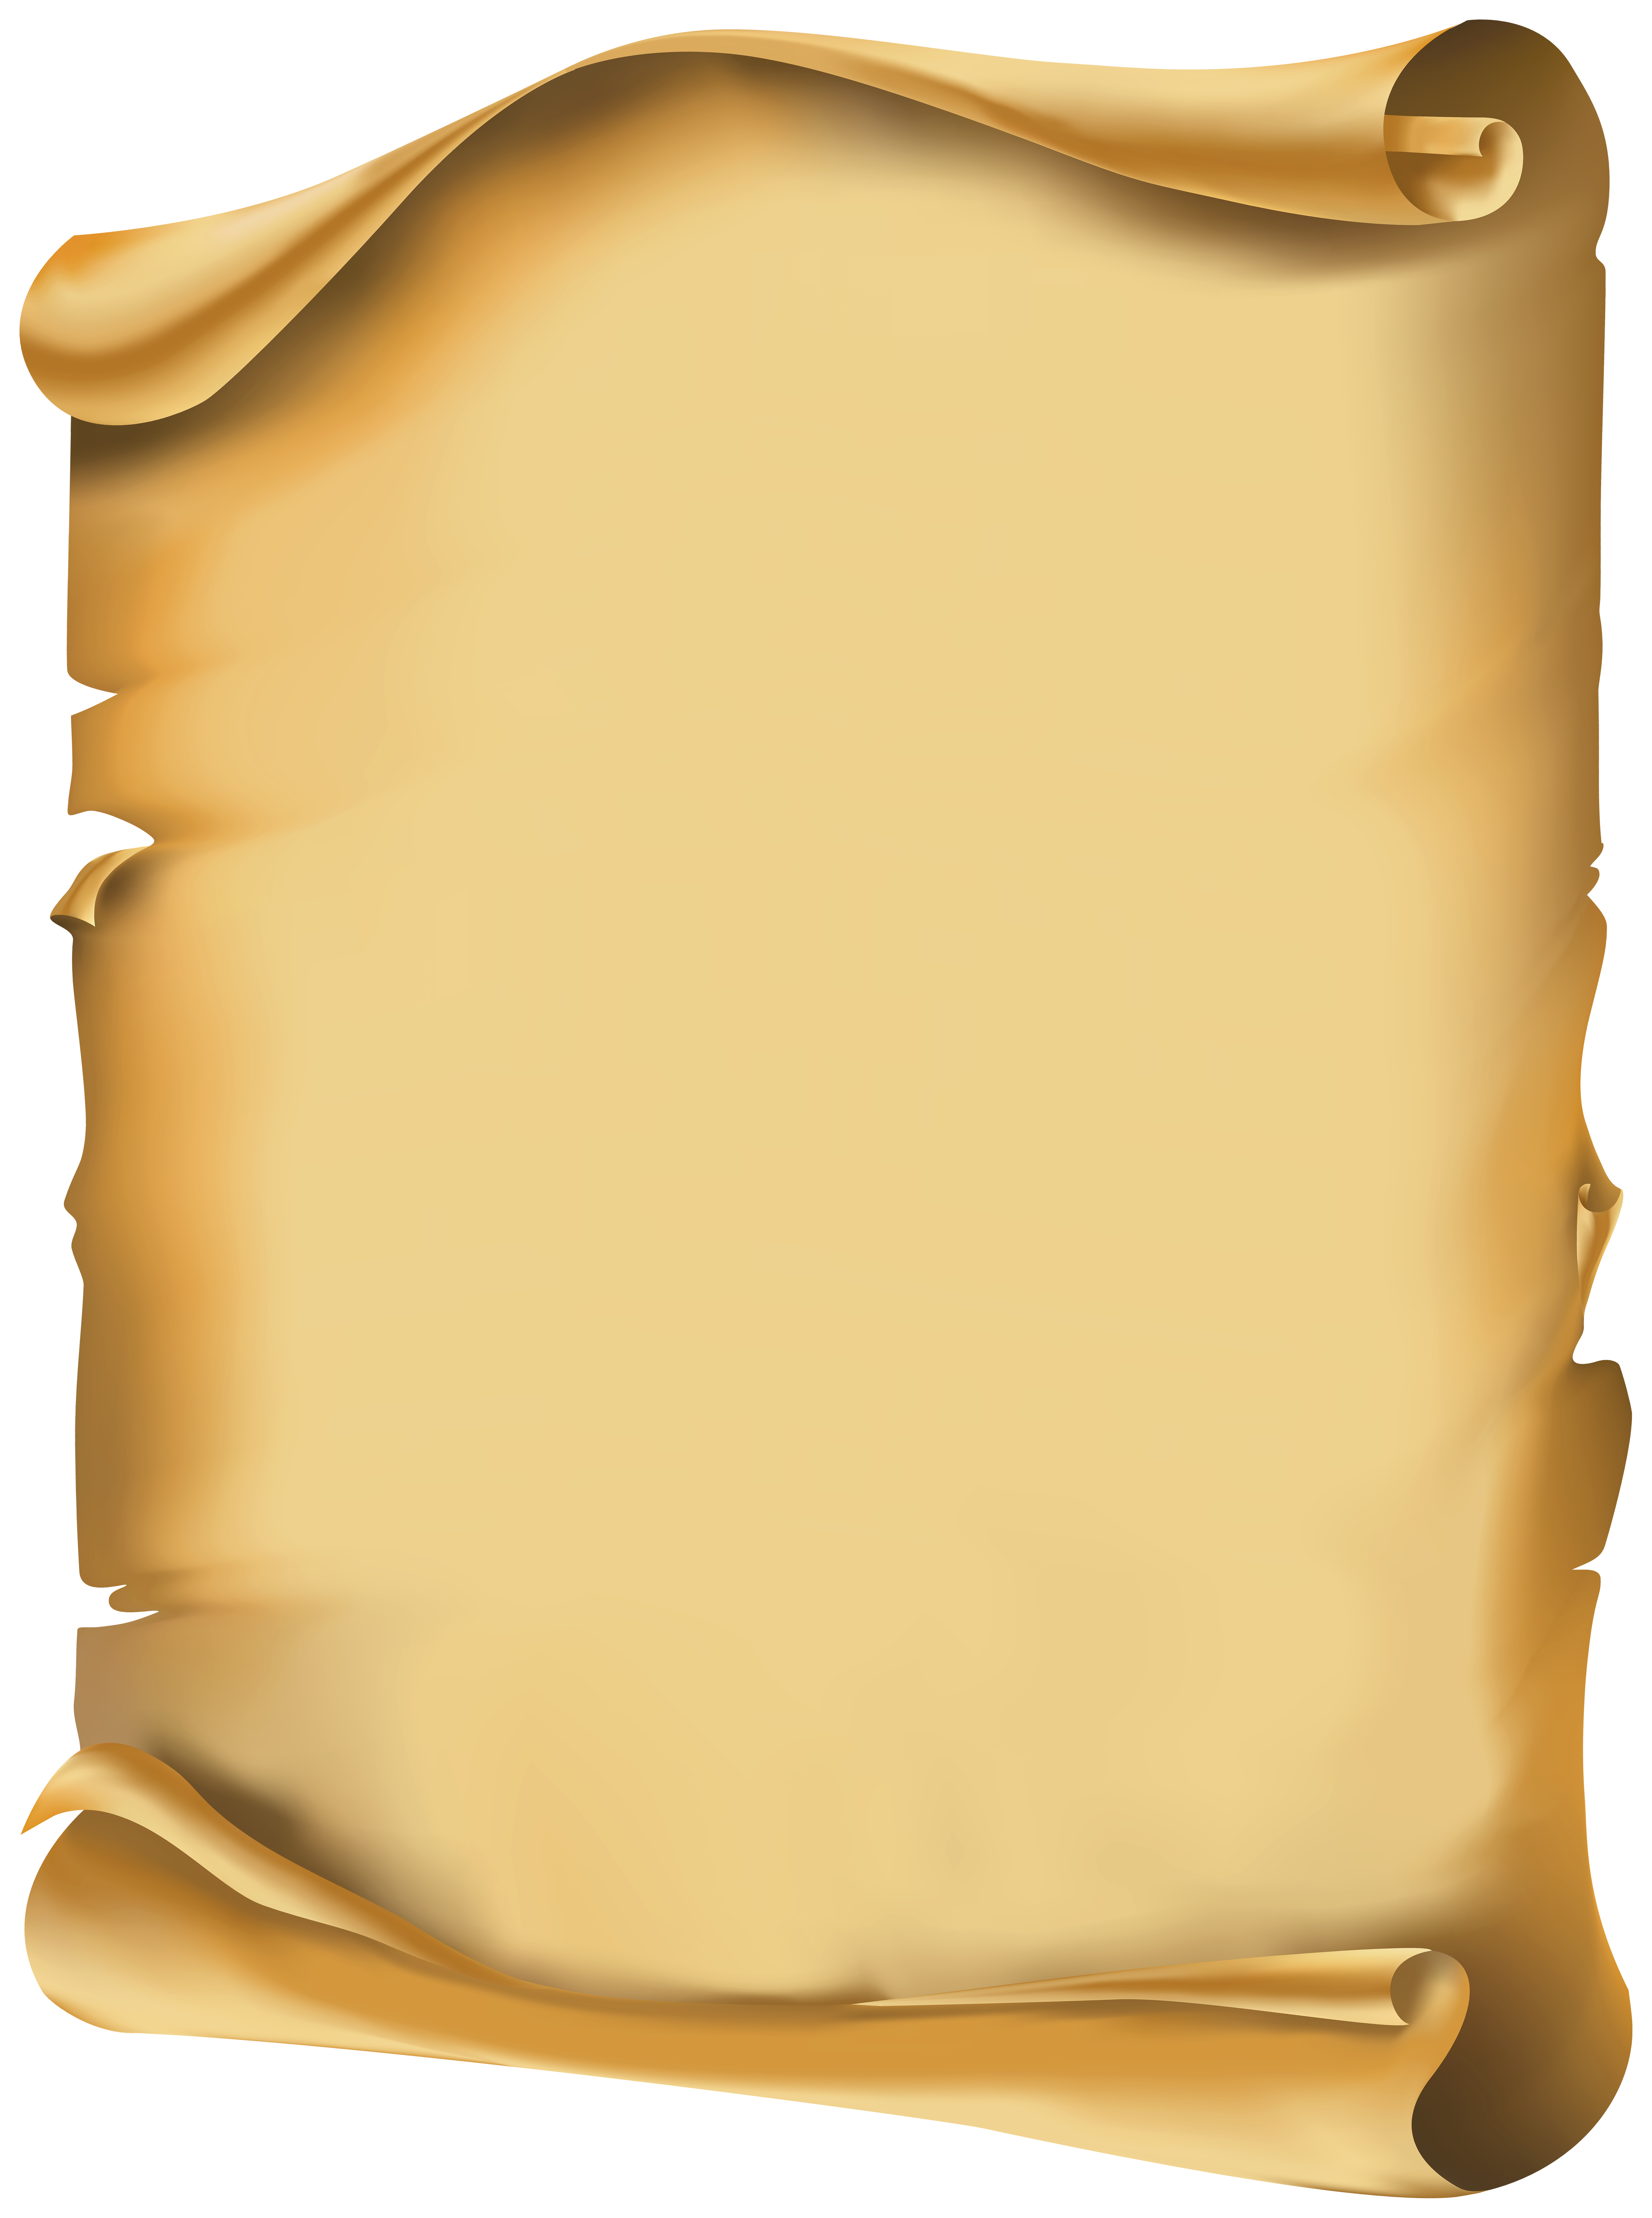 Ancient Scroll Clipart PNG Images, Ancient Blank Aged Worn Royal